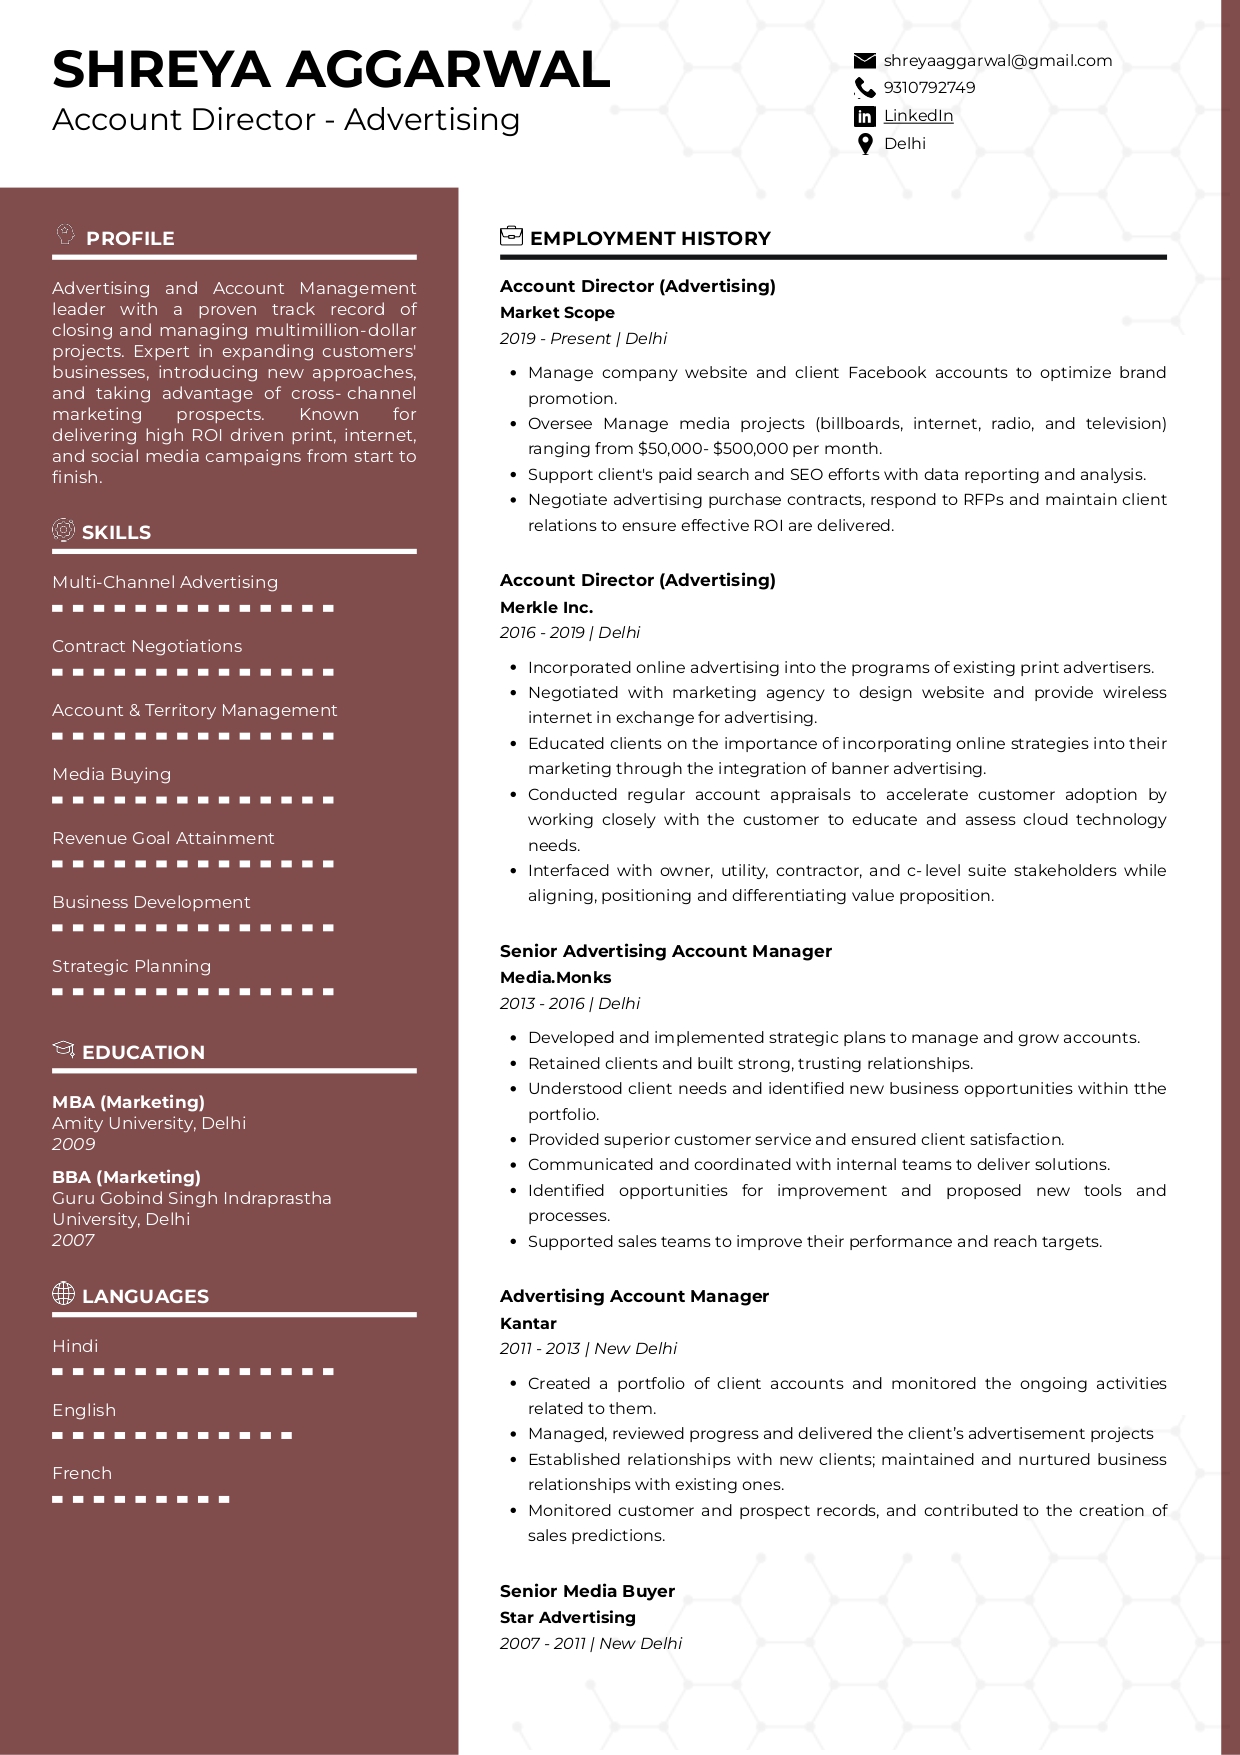 Resume of Account Director-Advertising